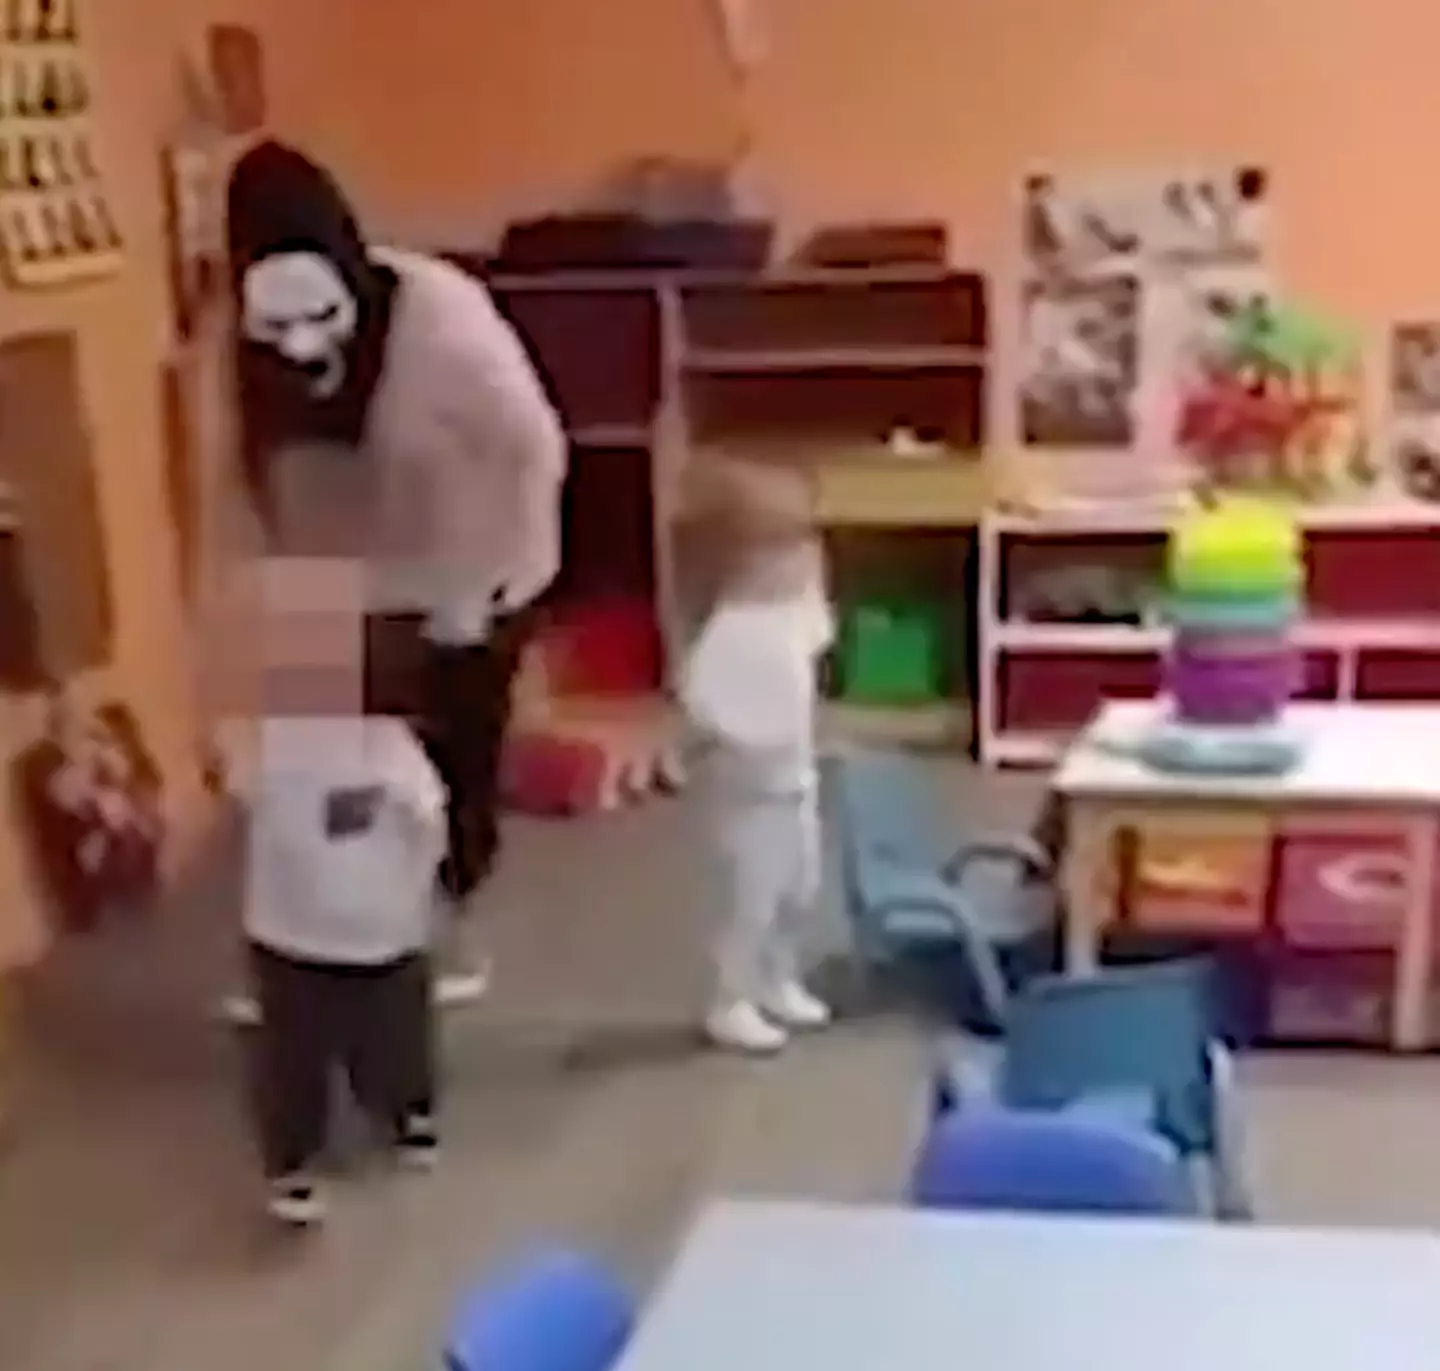 In another part of the video, the woman chases a little kid.